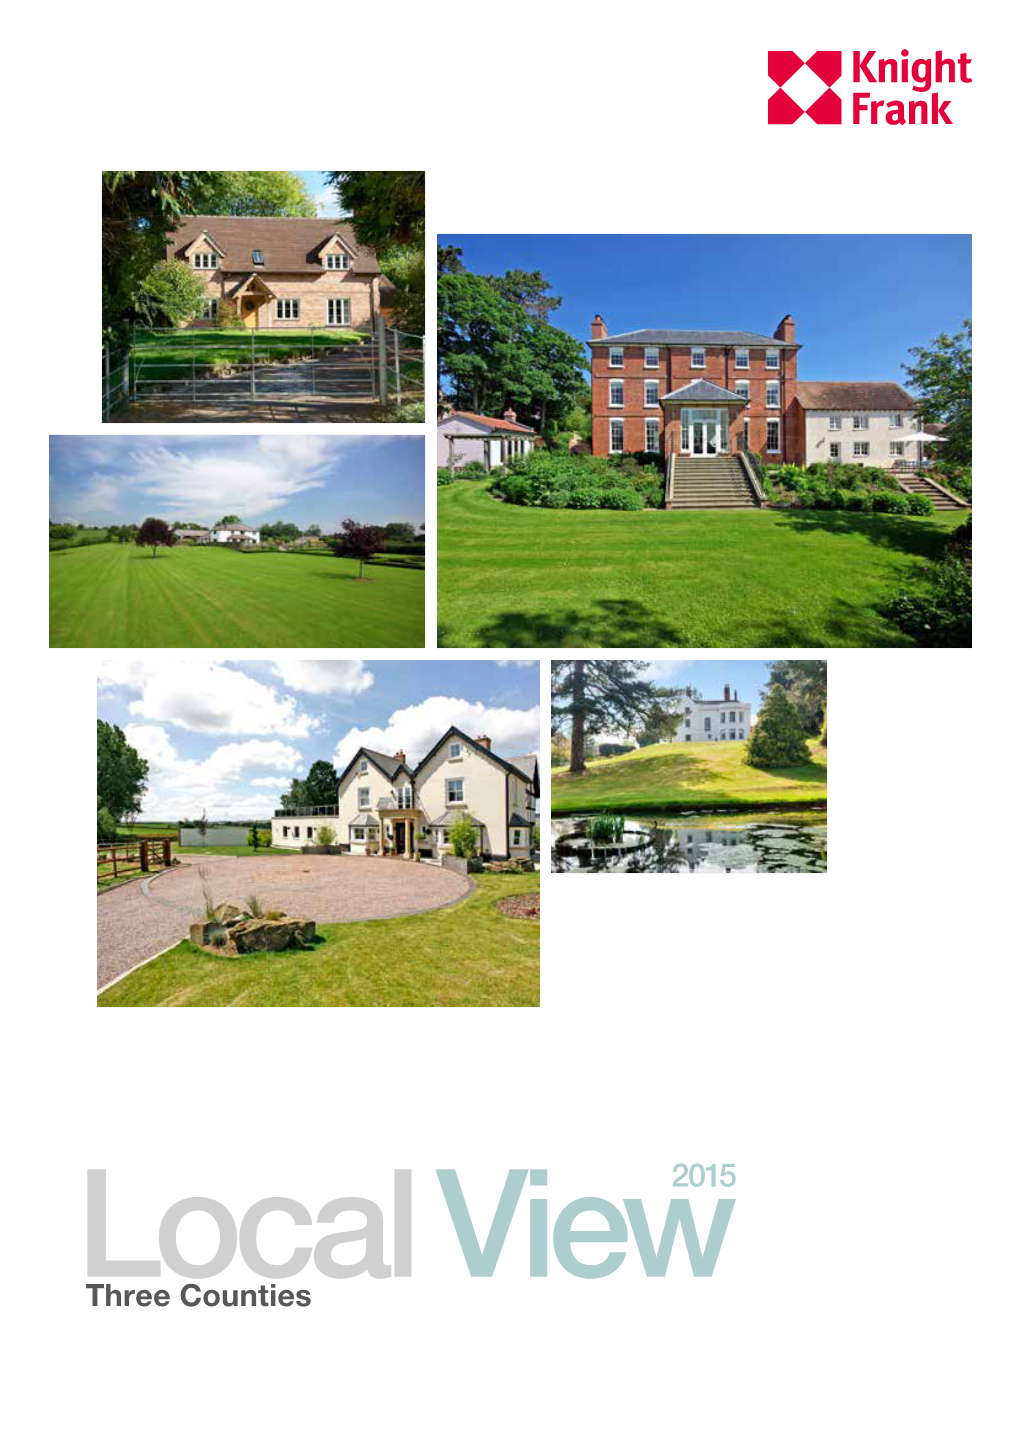 Three Counties Welcome to Local View